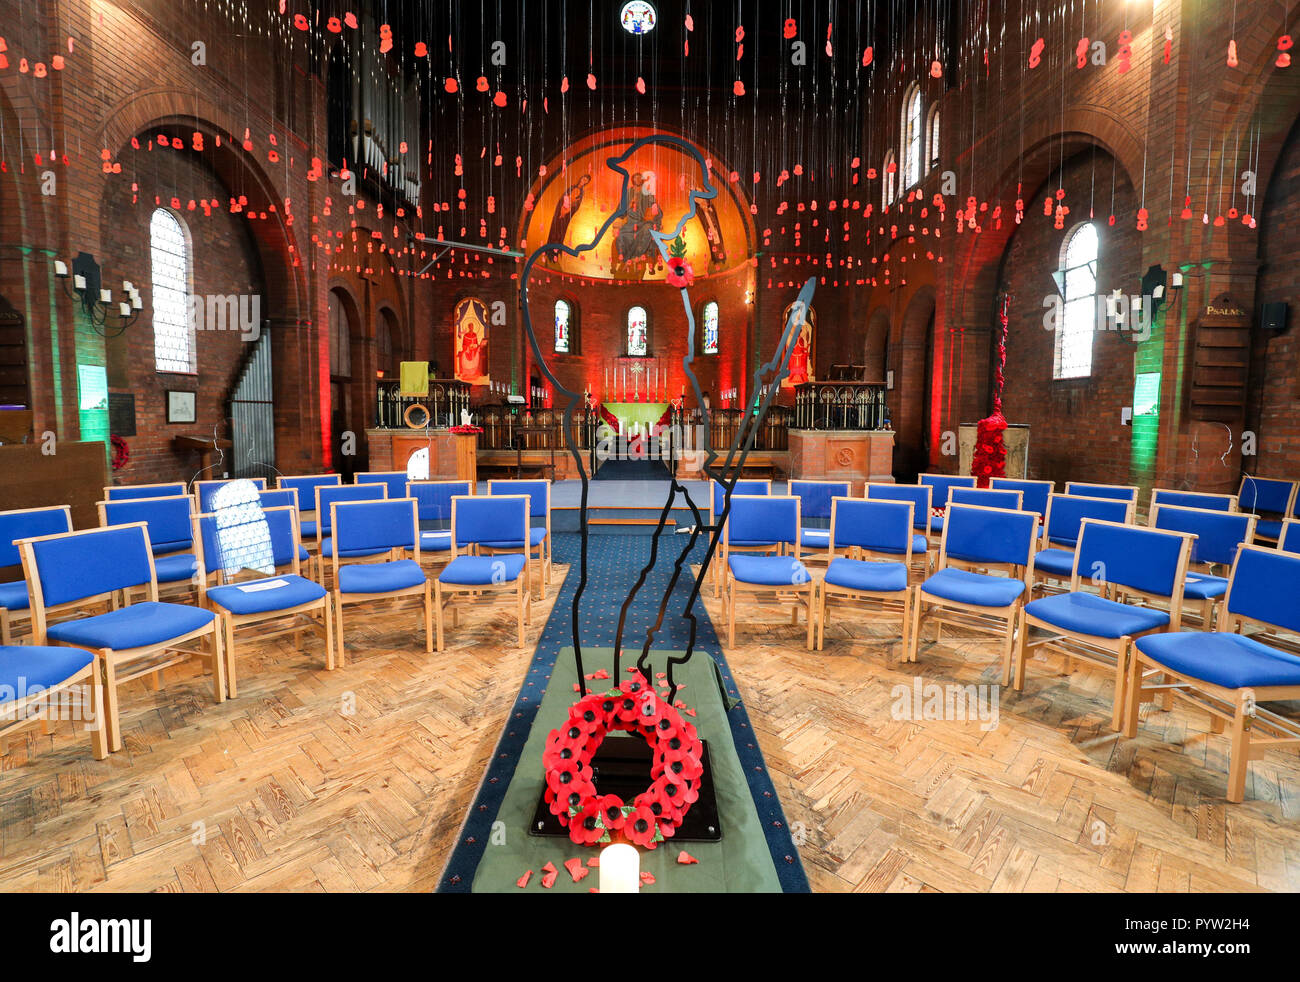 The Swindon Borough Council Tommy silhouette on display inside St Augustine's Church, Even Swindon, Wiltshire, where 1300 poppies hang from the roof to represent the lives lost in the local area during World War I. Stock Photo